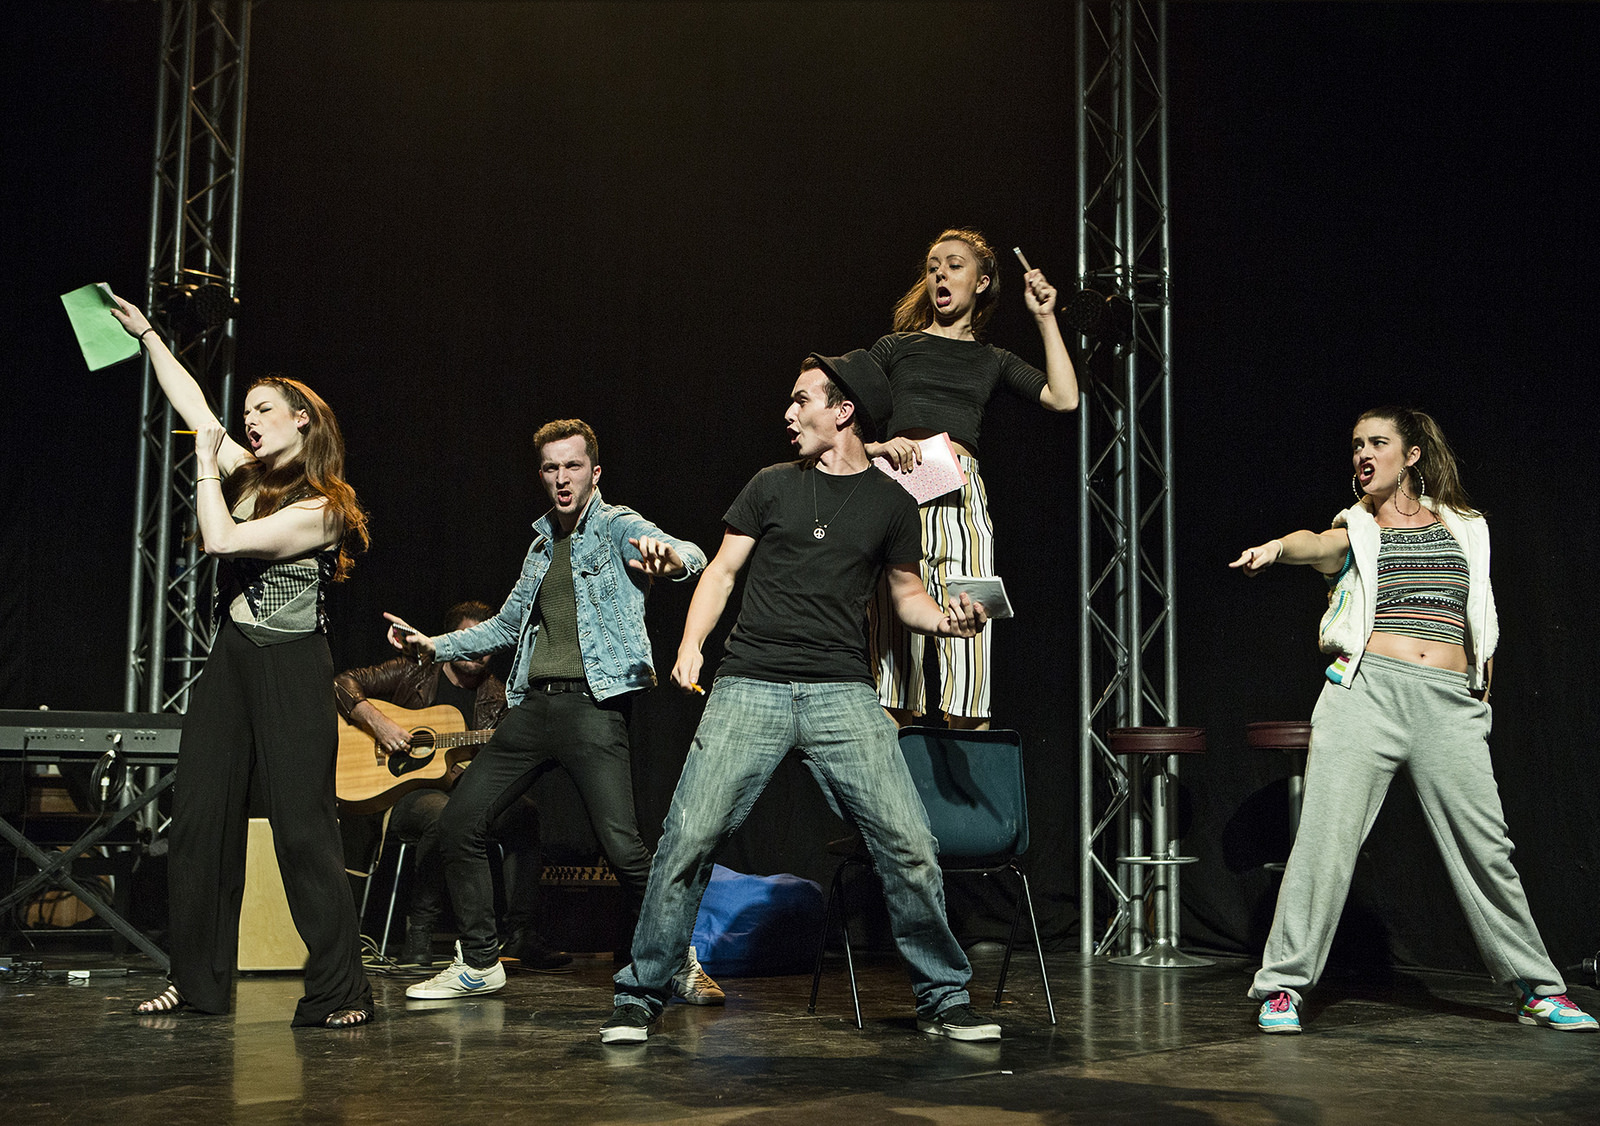 A group of performers on stage singing and moving